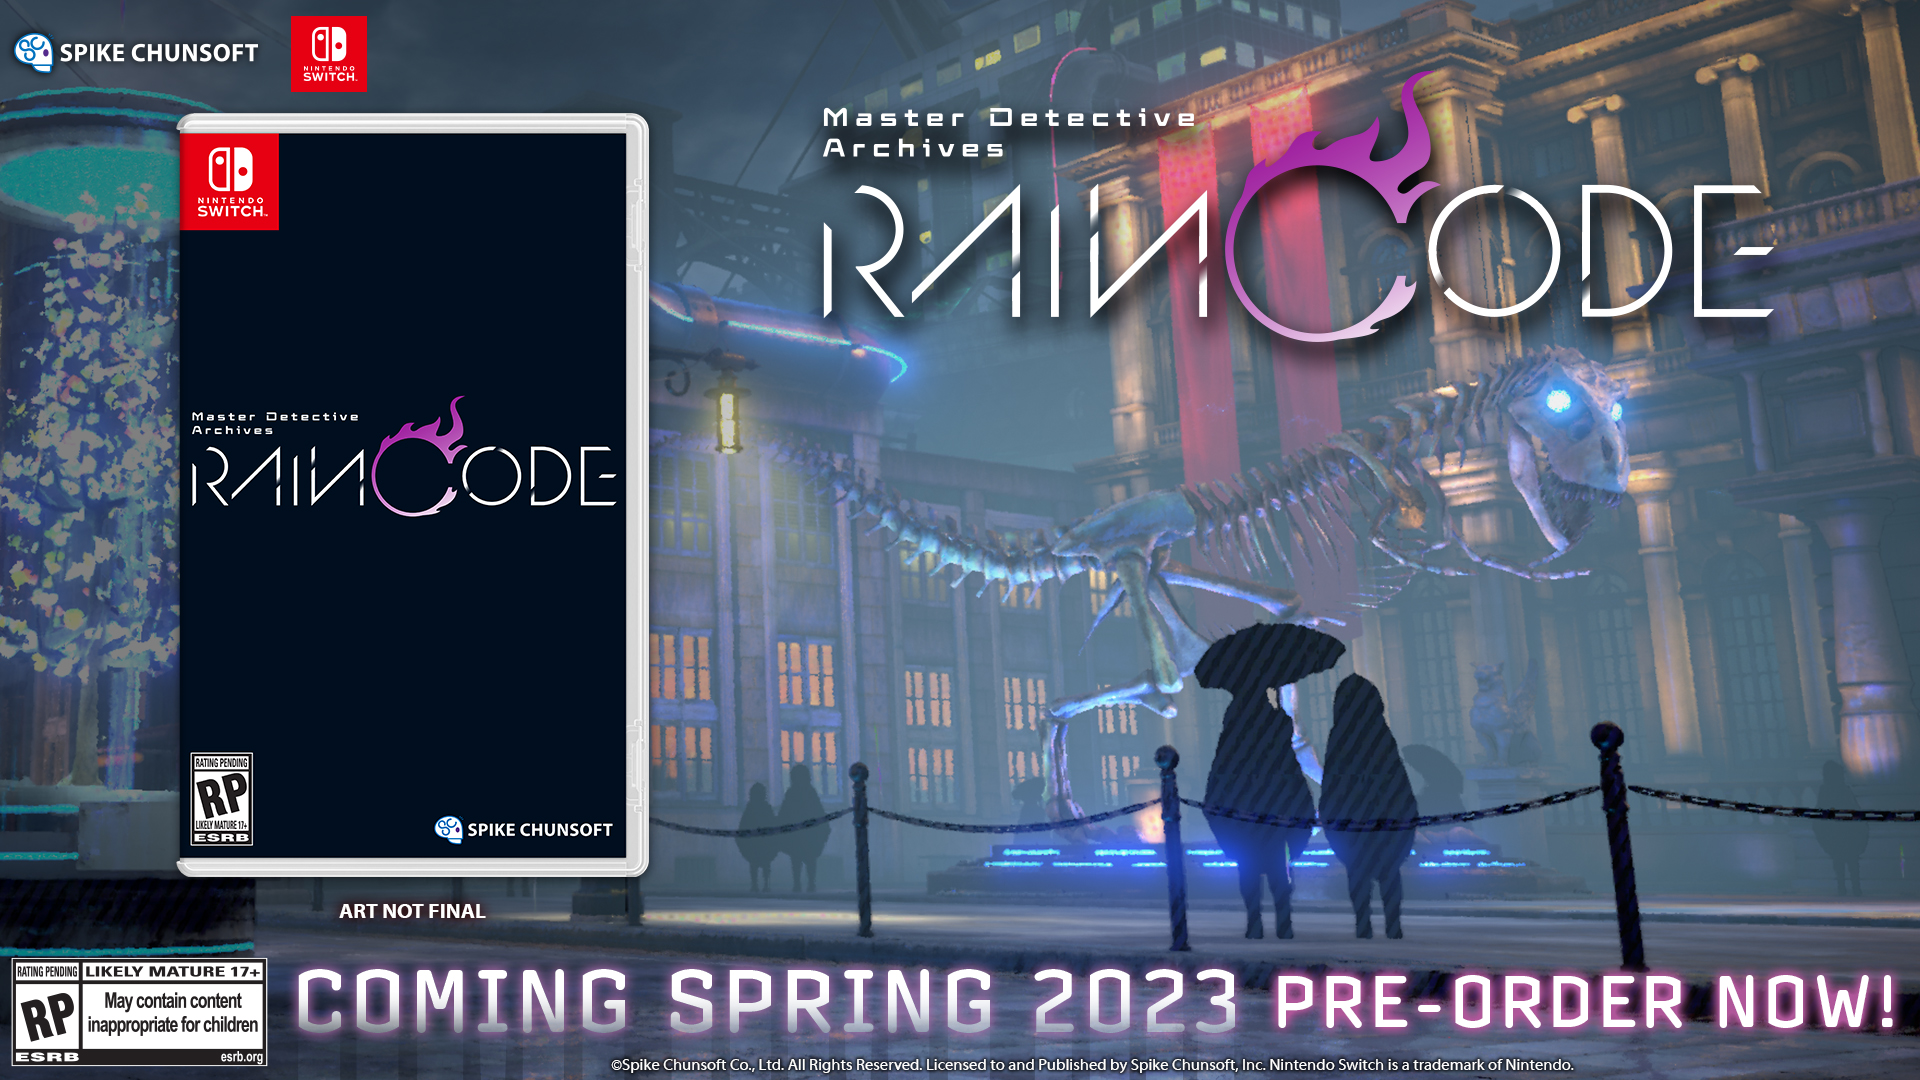 Master Detective Archives: RAIN CODE Chunsoft Mysteriful Limited Spike - Open Switch™ Nintendo Edition for Pre-Orders Details Revealed. Today